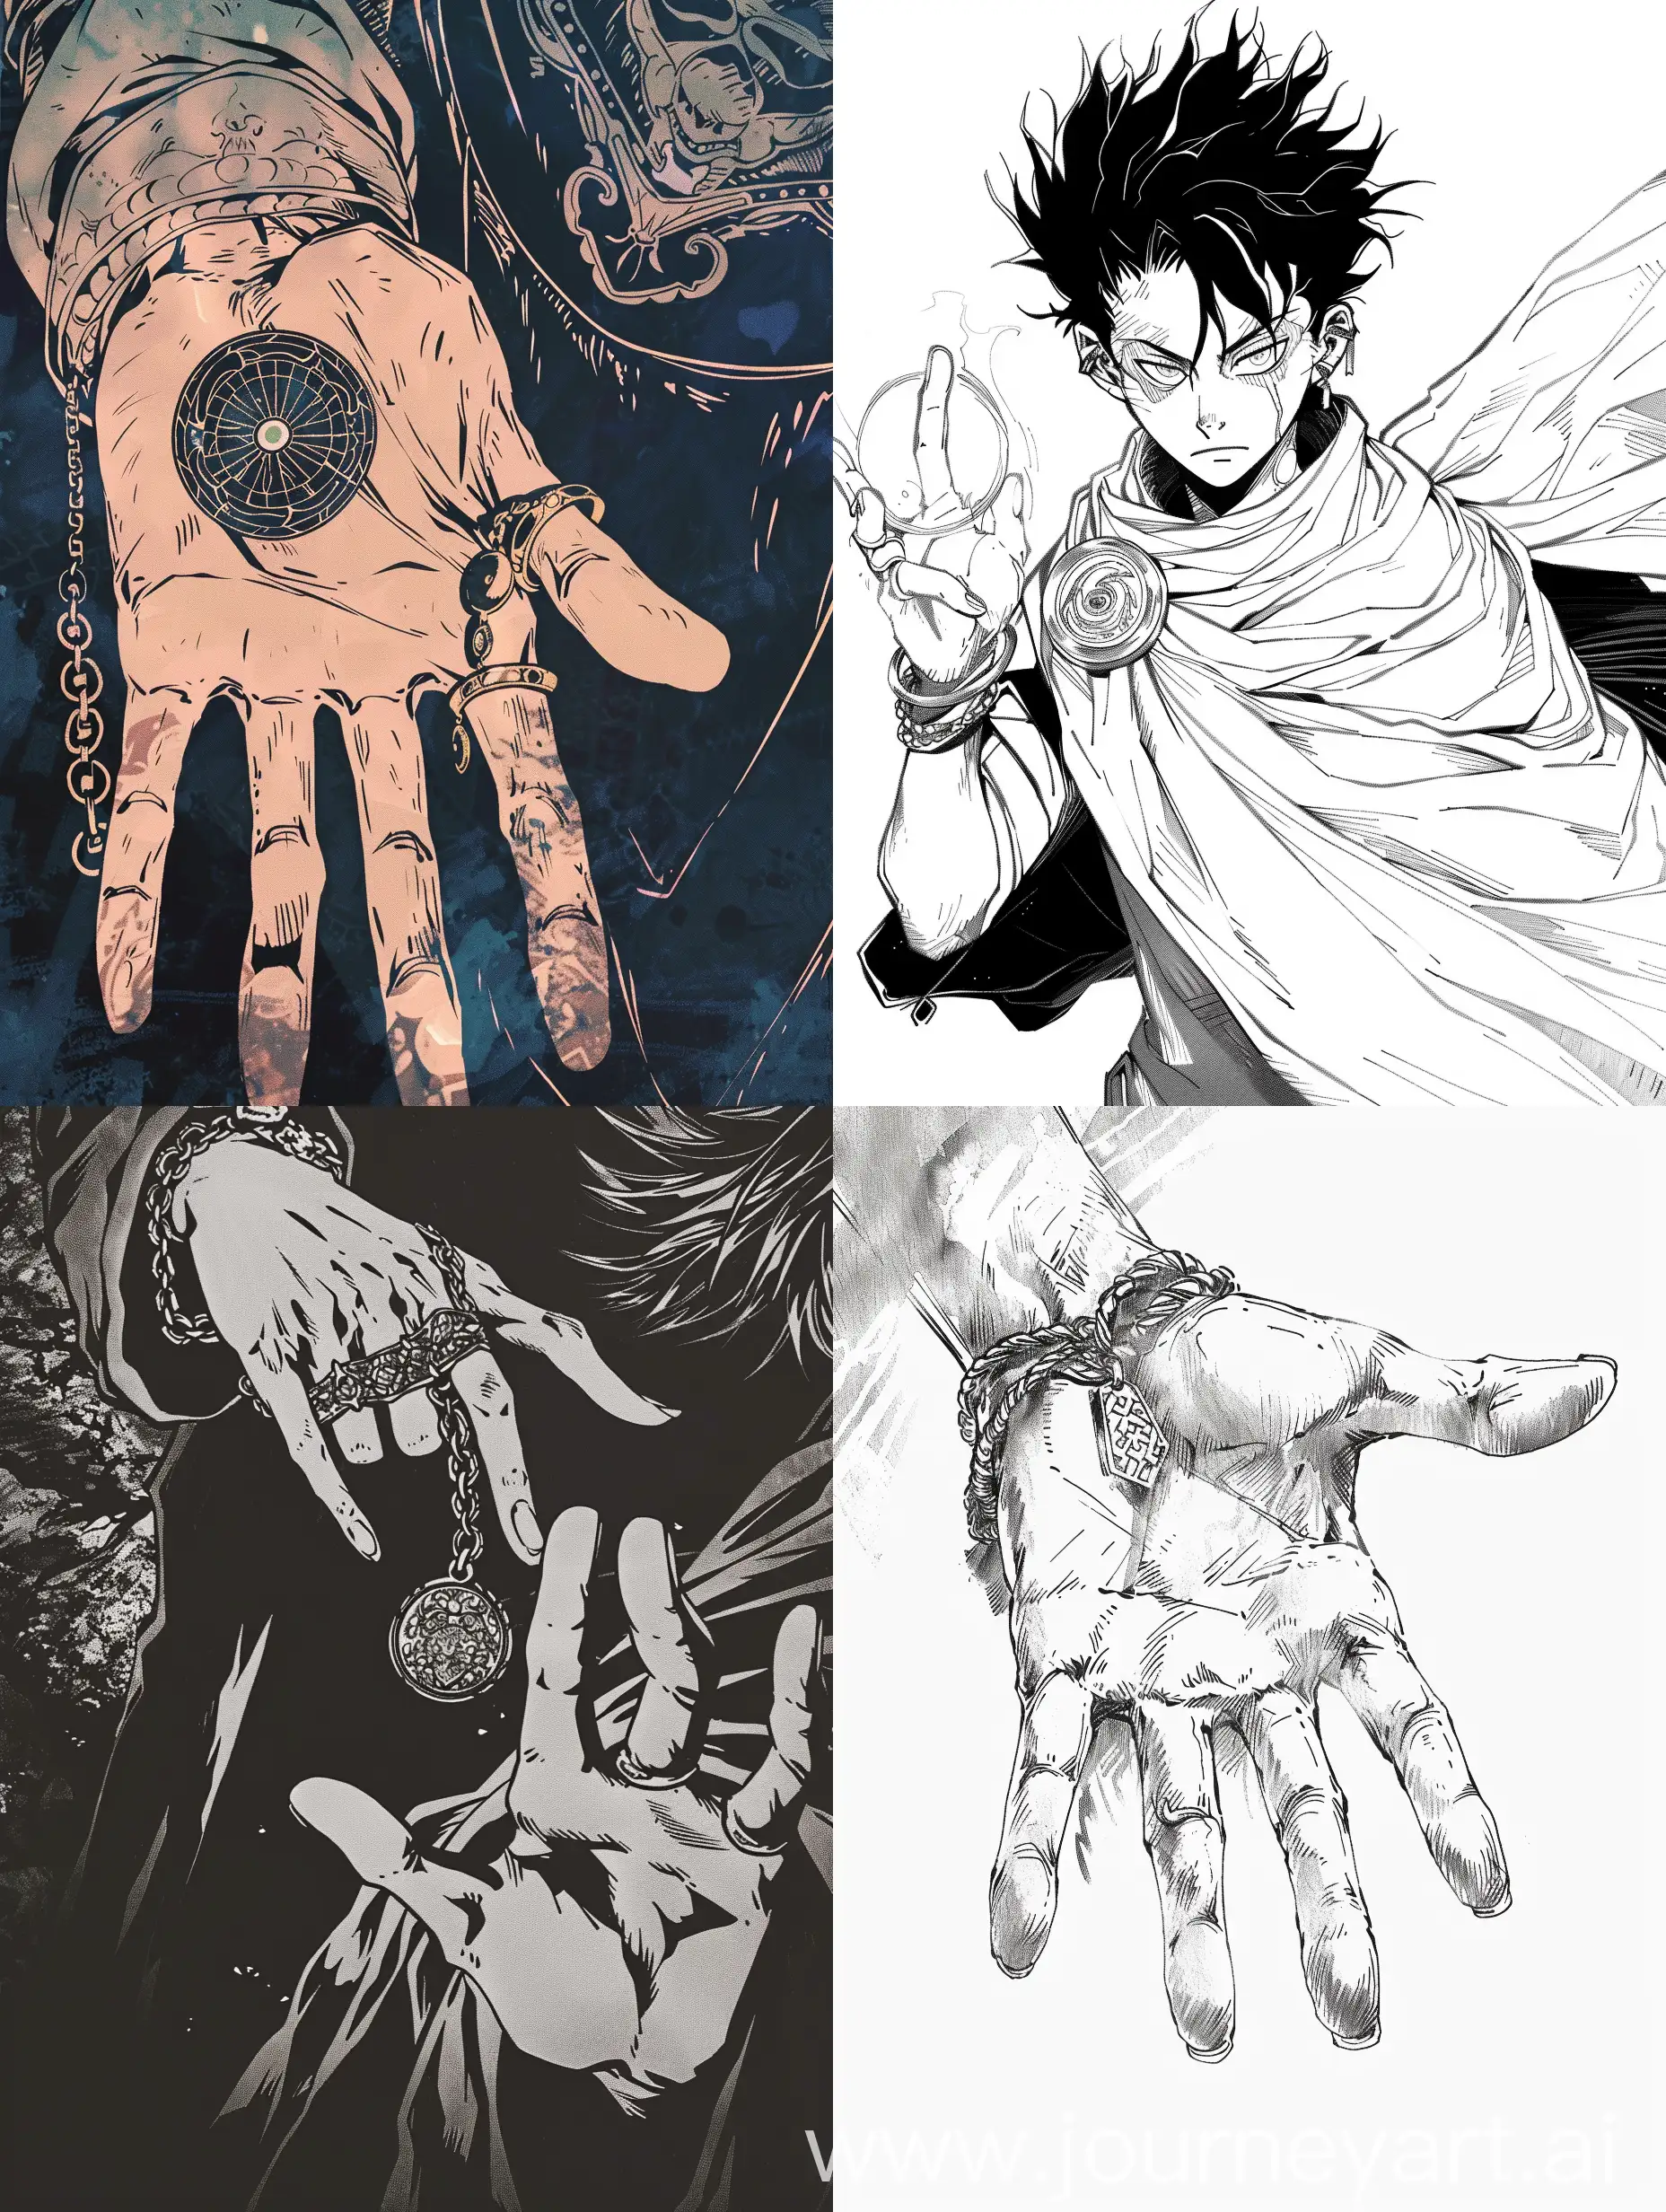 MangaStyled-Character-Grasping-Amulet-with-Left-Hand